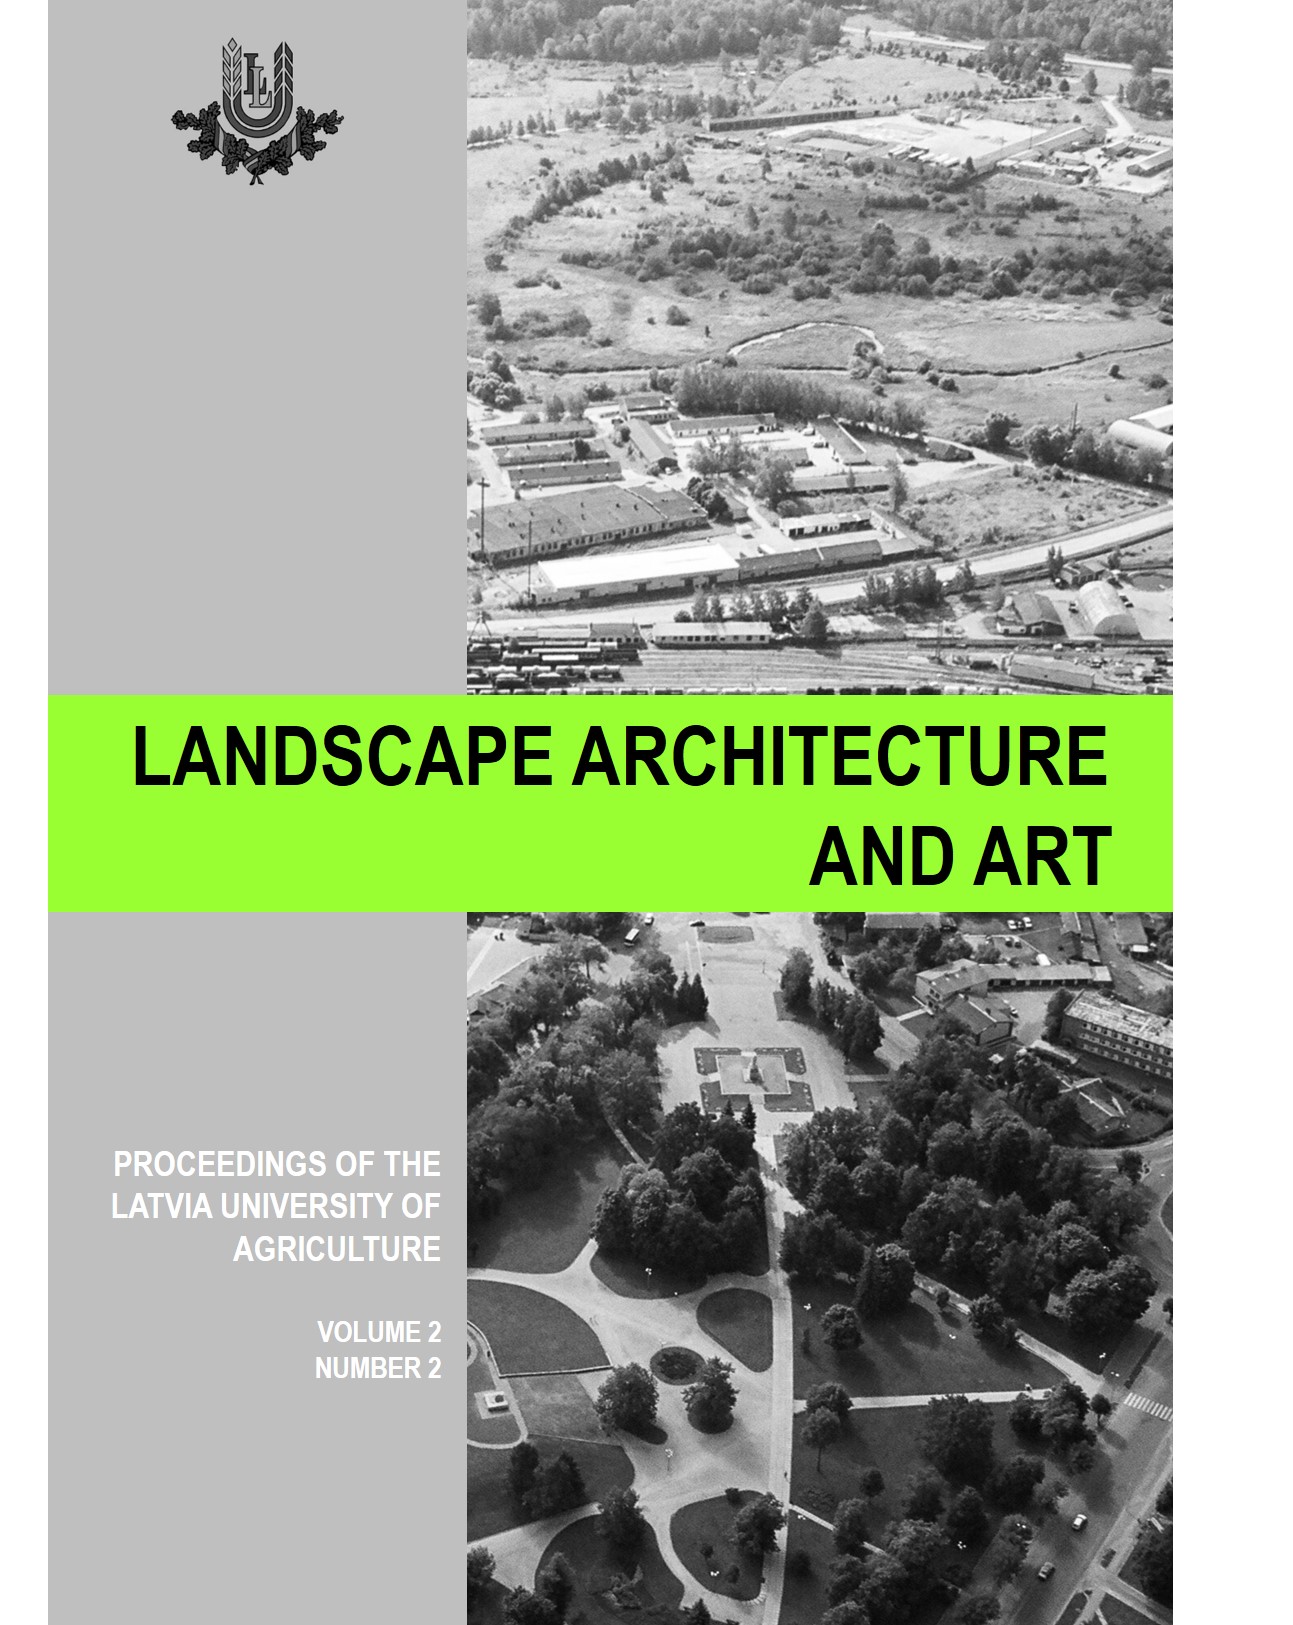 					View Vol. 2 No. 2 (2013): Proceedings of the Latvia University of Agriculture "Landscape Architecture and Art", Volume 2
				